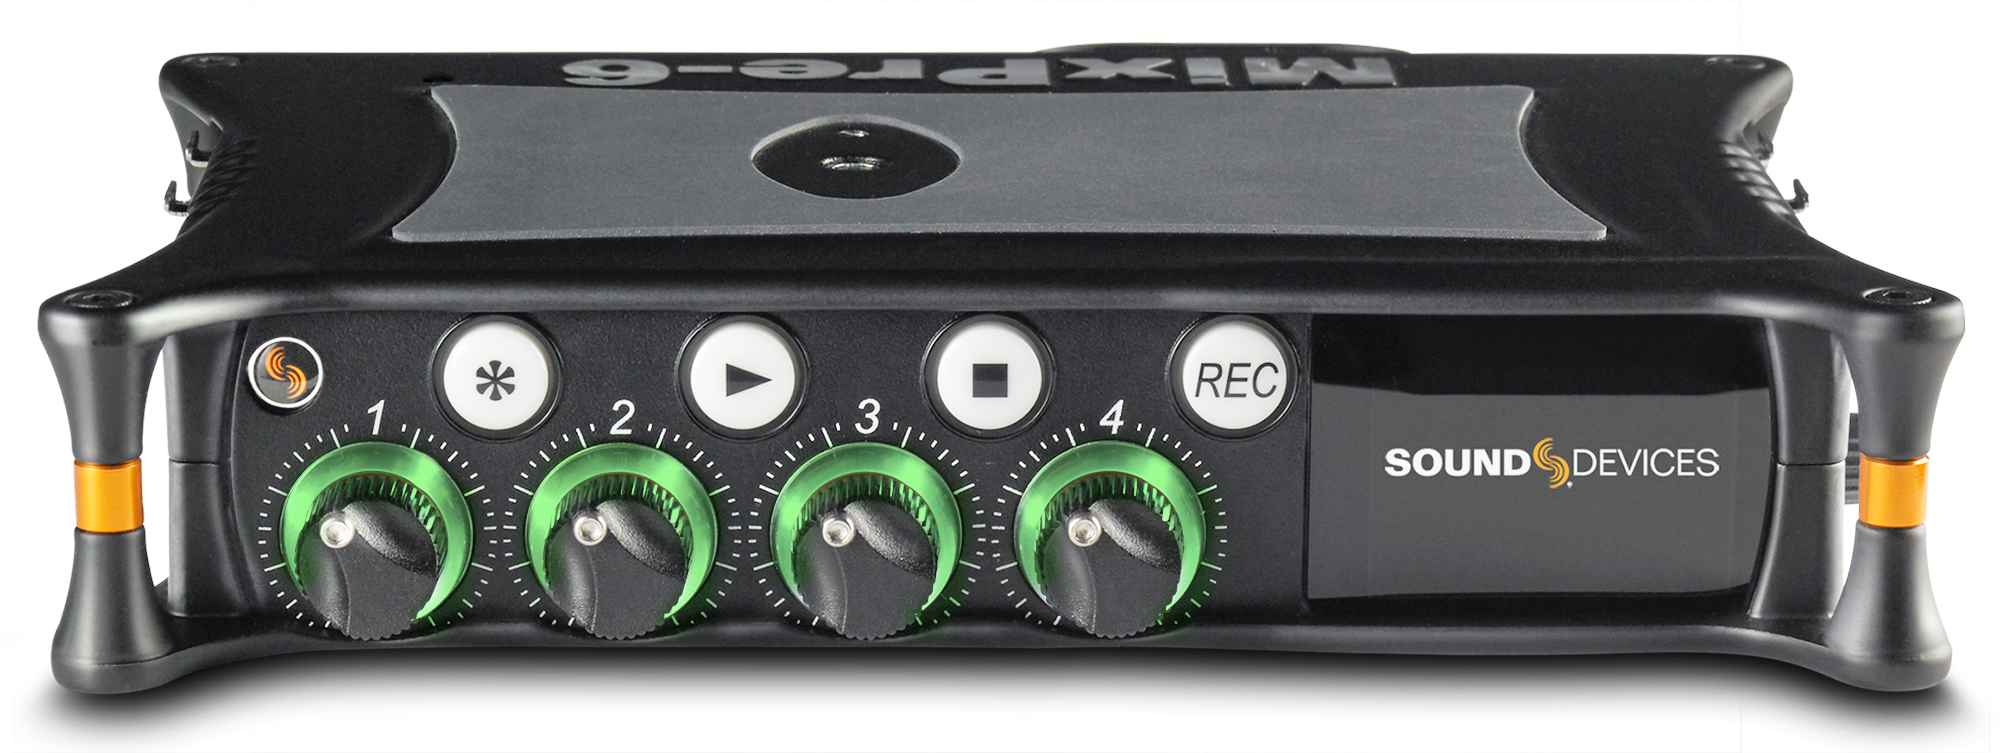 Review: MixPre-3 audio recorder/mixer from Sound Devices 15